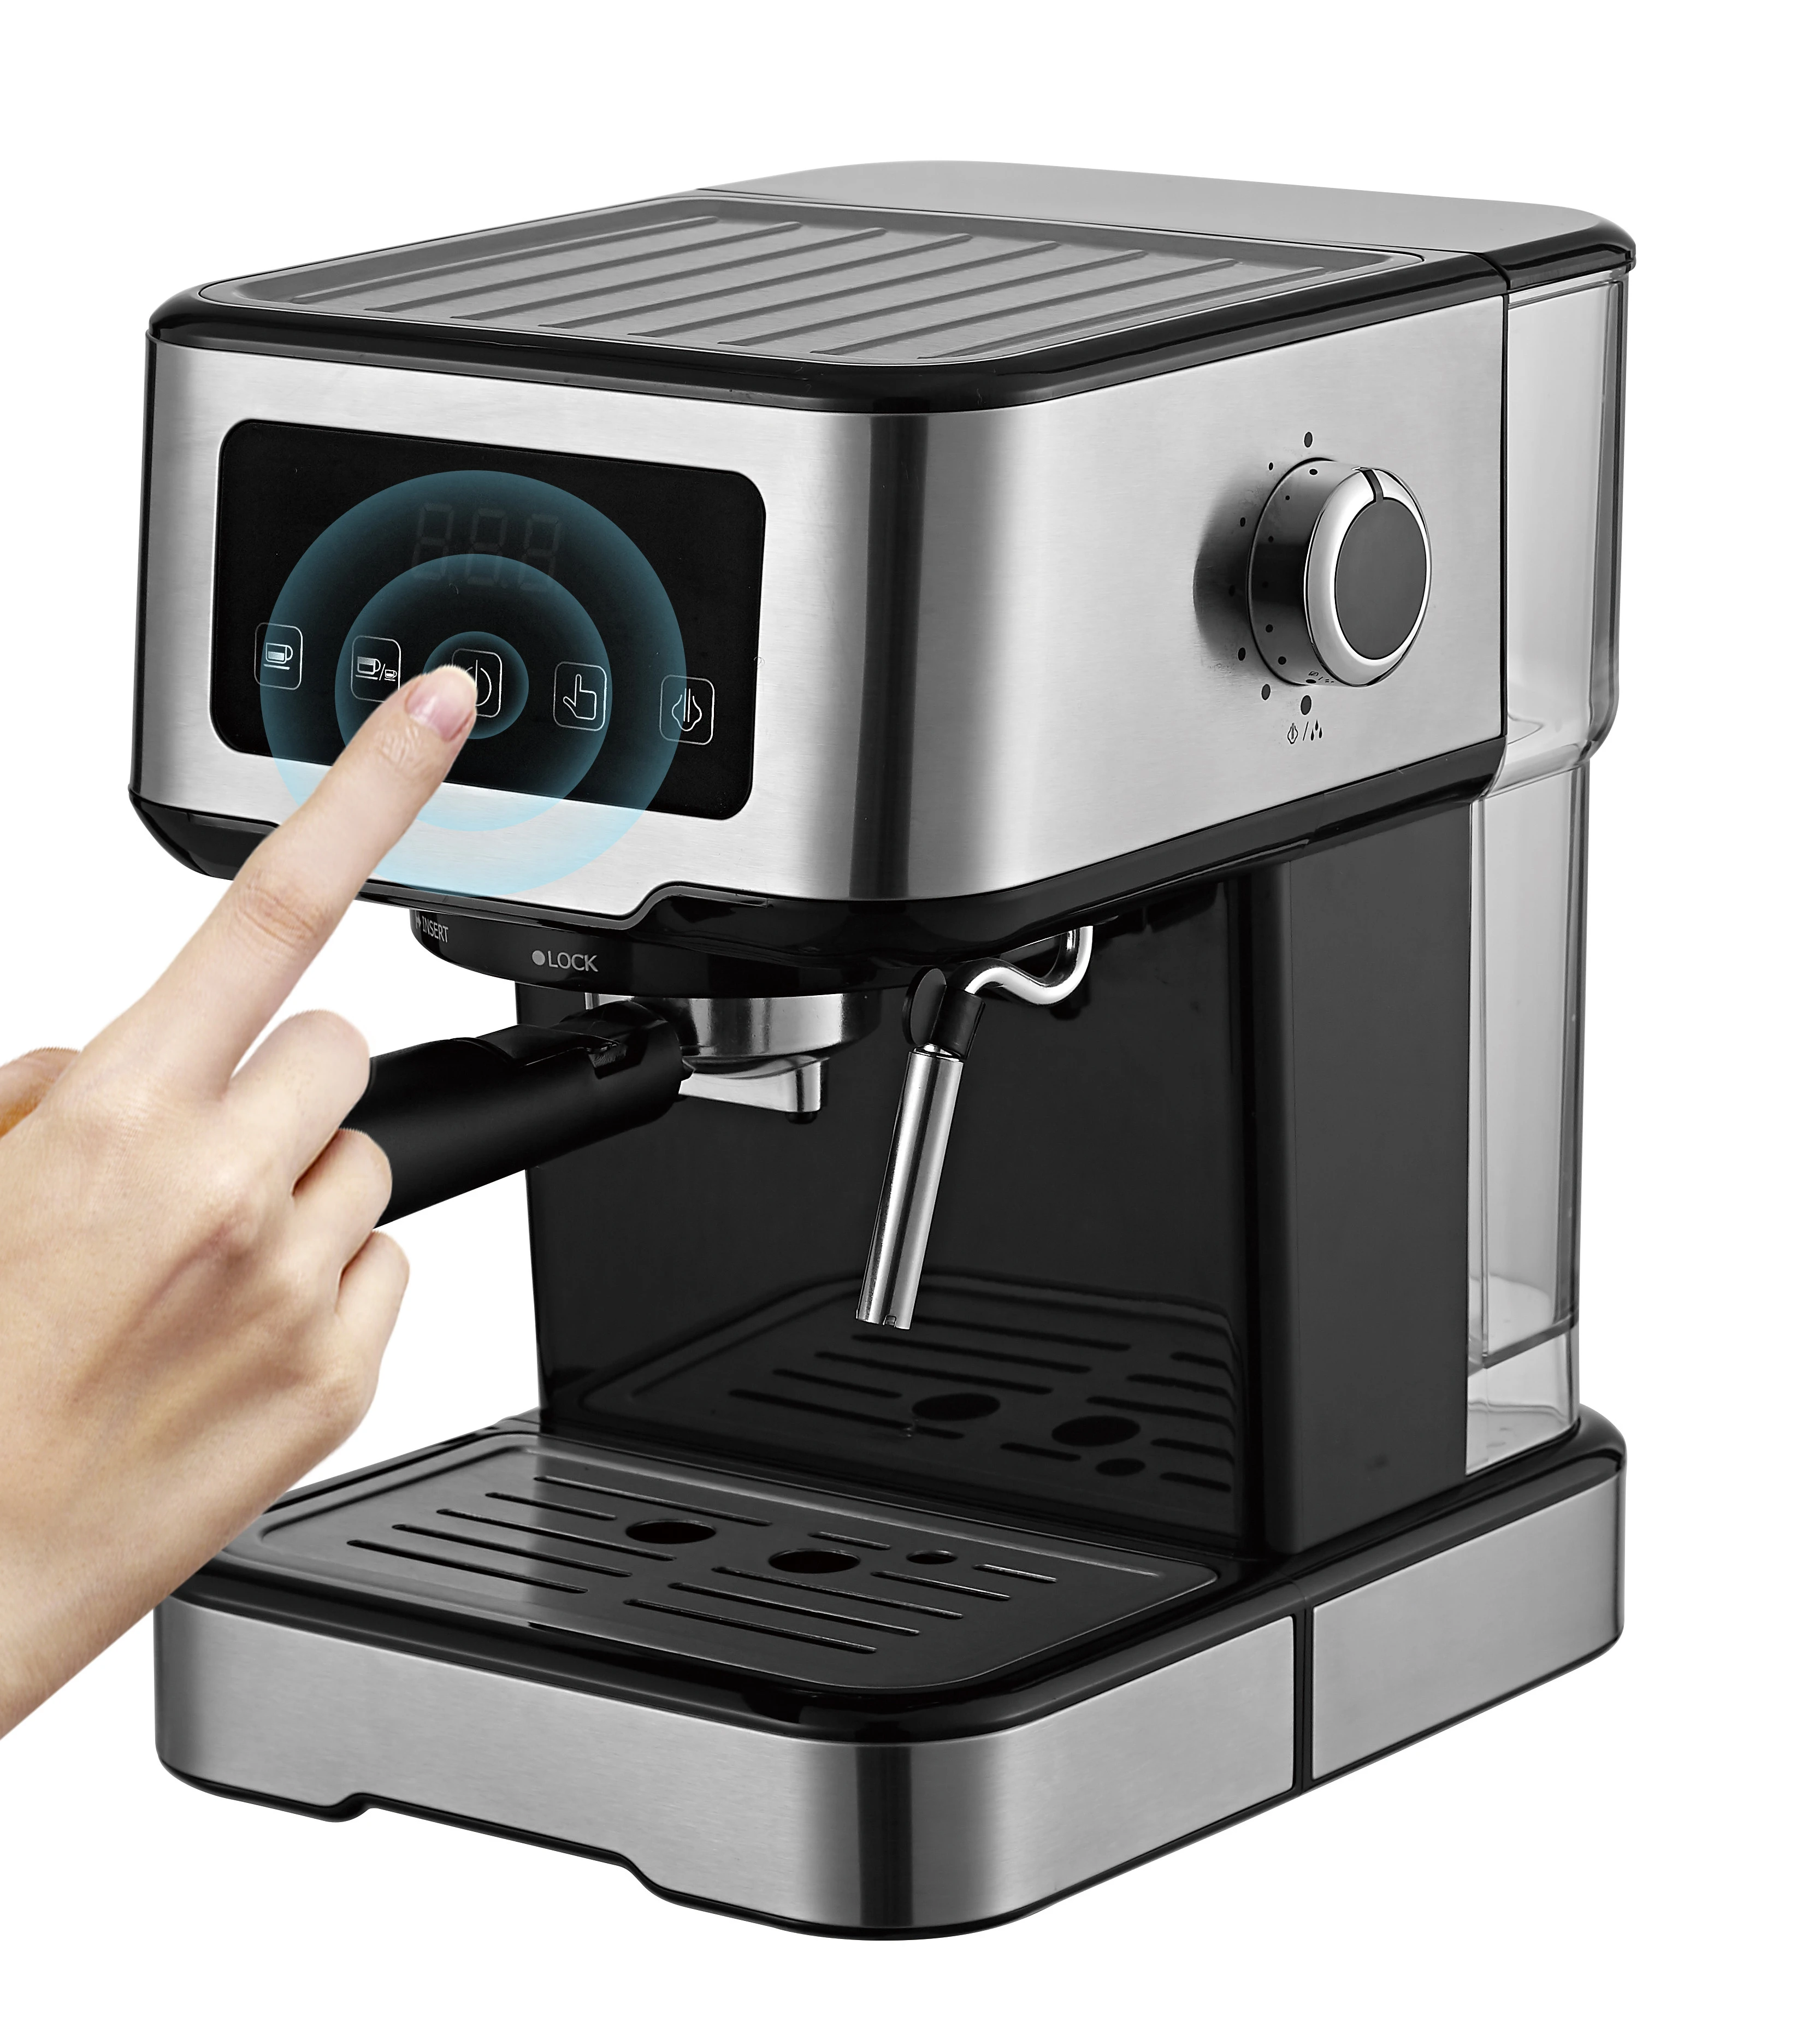 Stainless steel item manufacturer digital screen panel touchscreen espresso coffee machine electric coffee maker